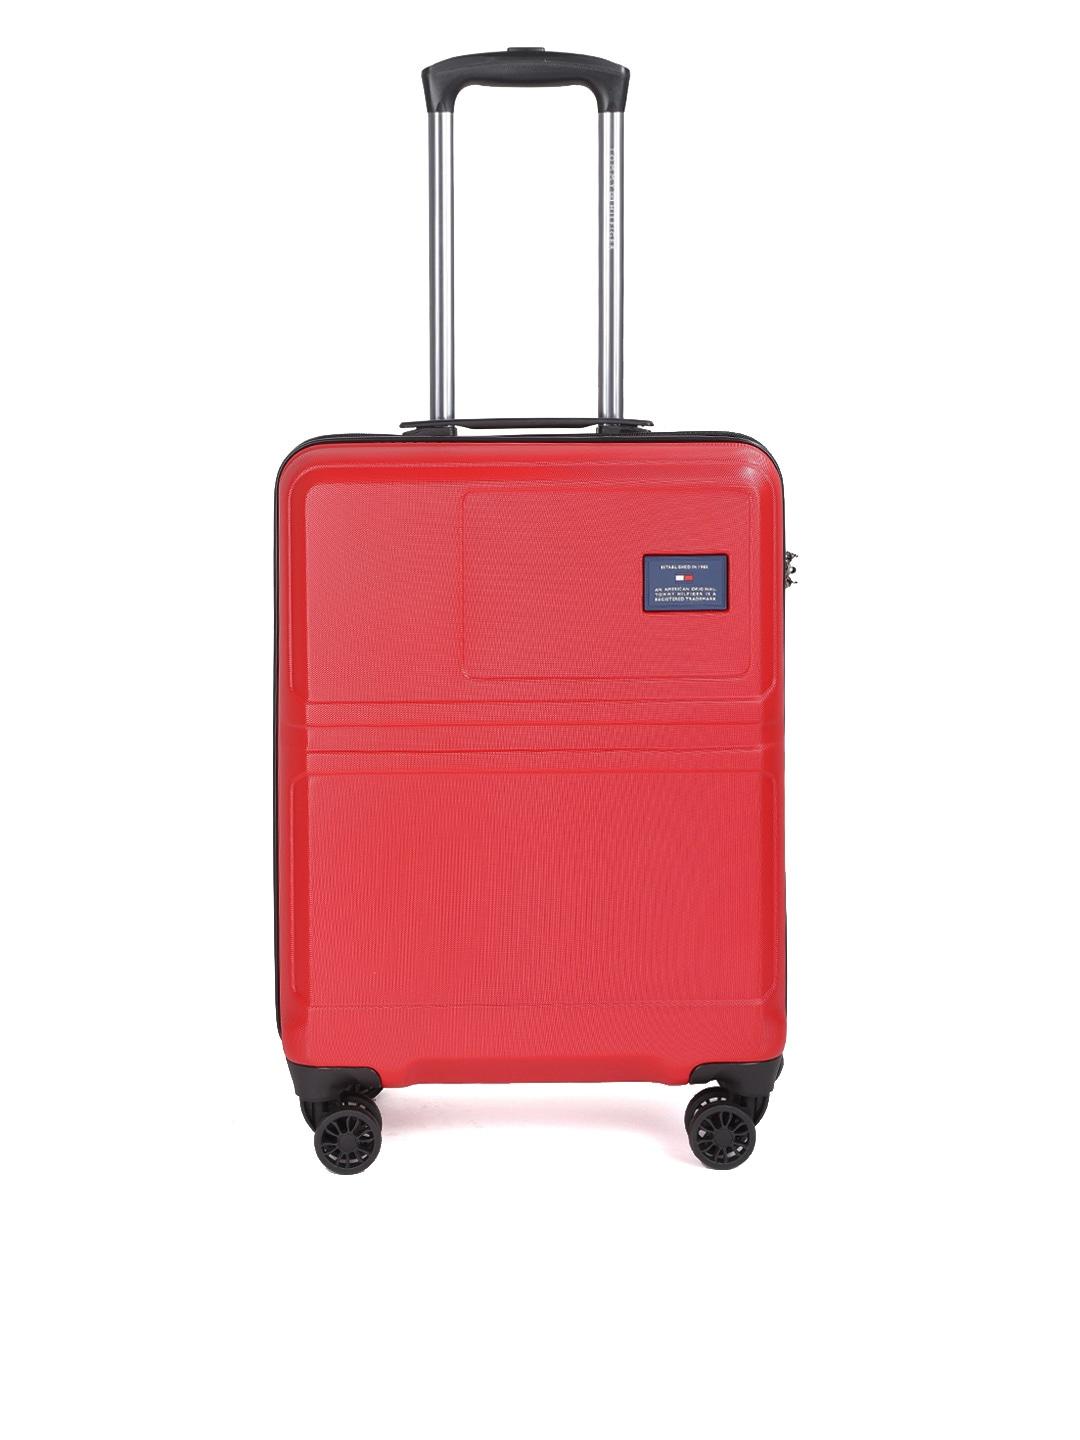 Tommy Hilfiger  Red Hard Luggage 4-Wheel 360-Degree Rotation Cabin Trolley Suitcase